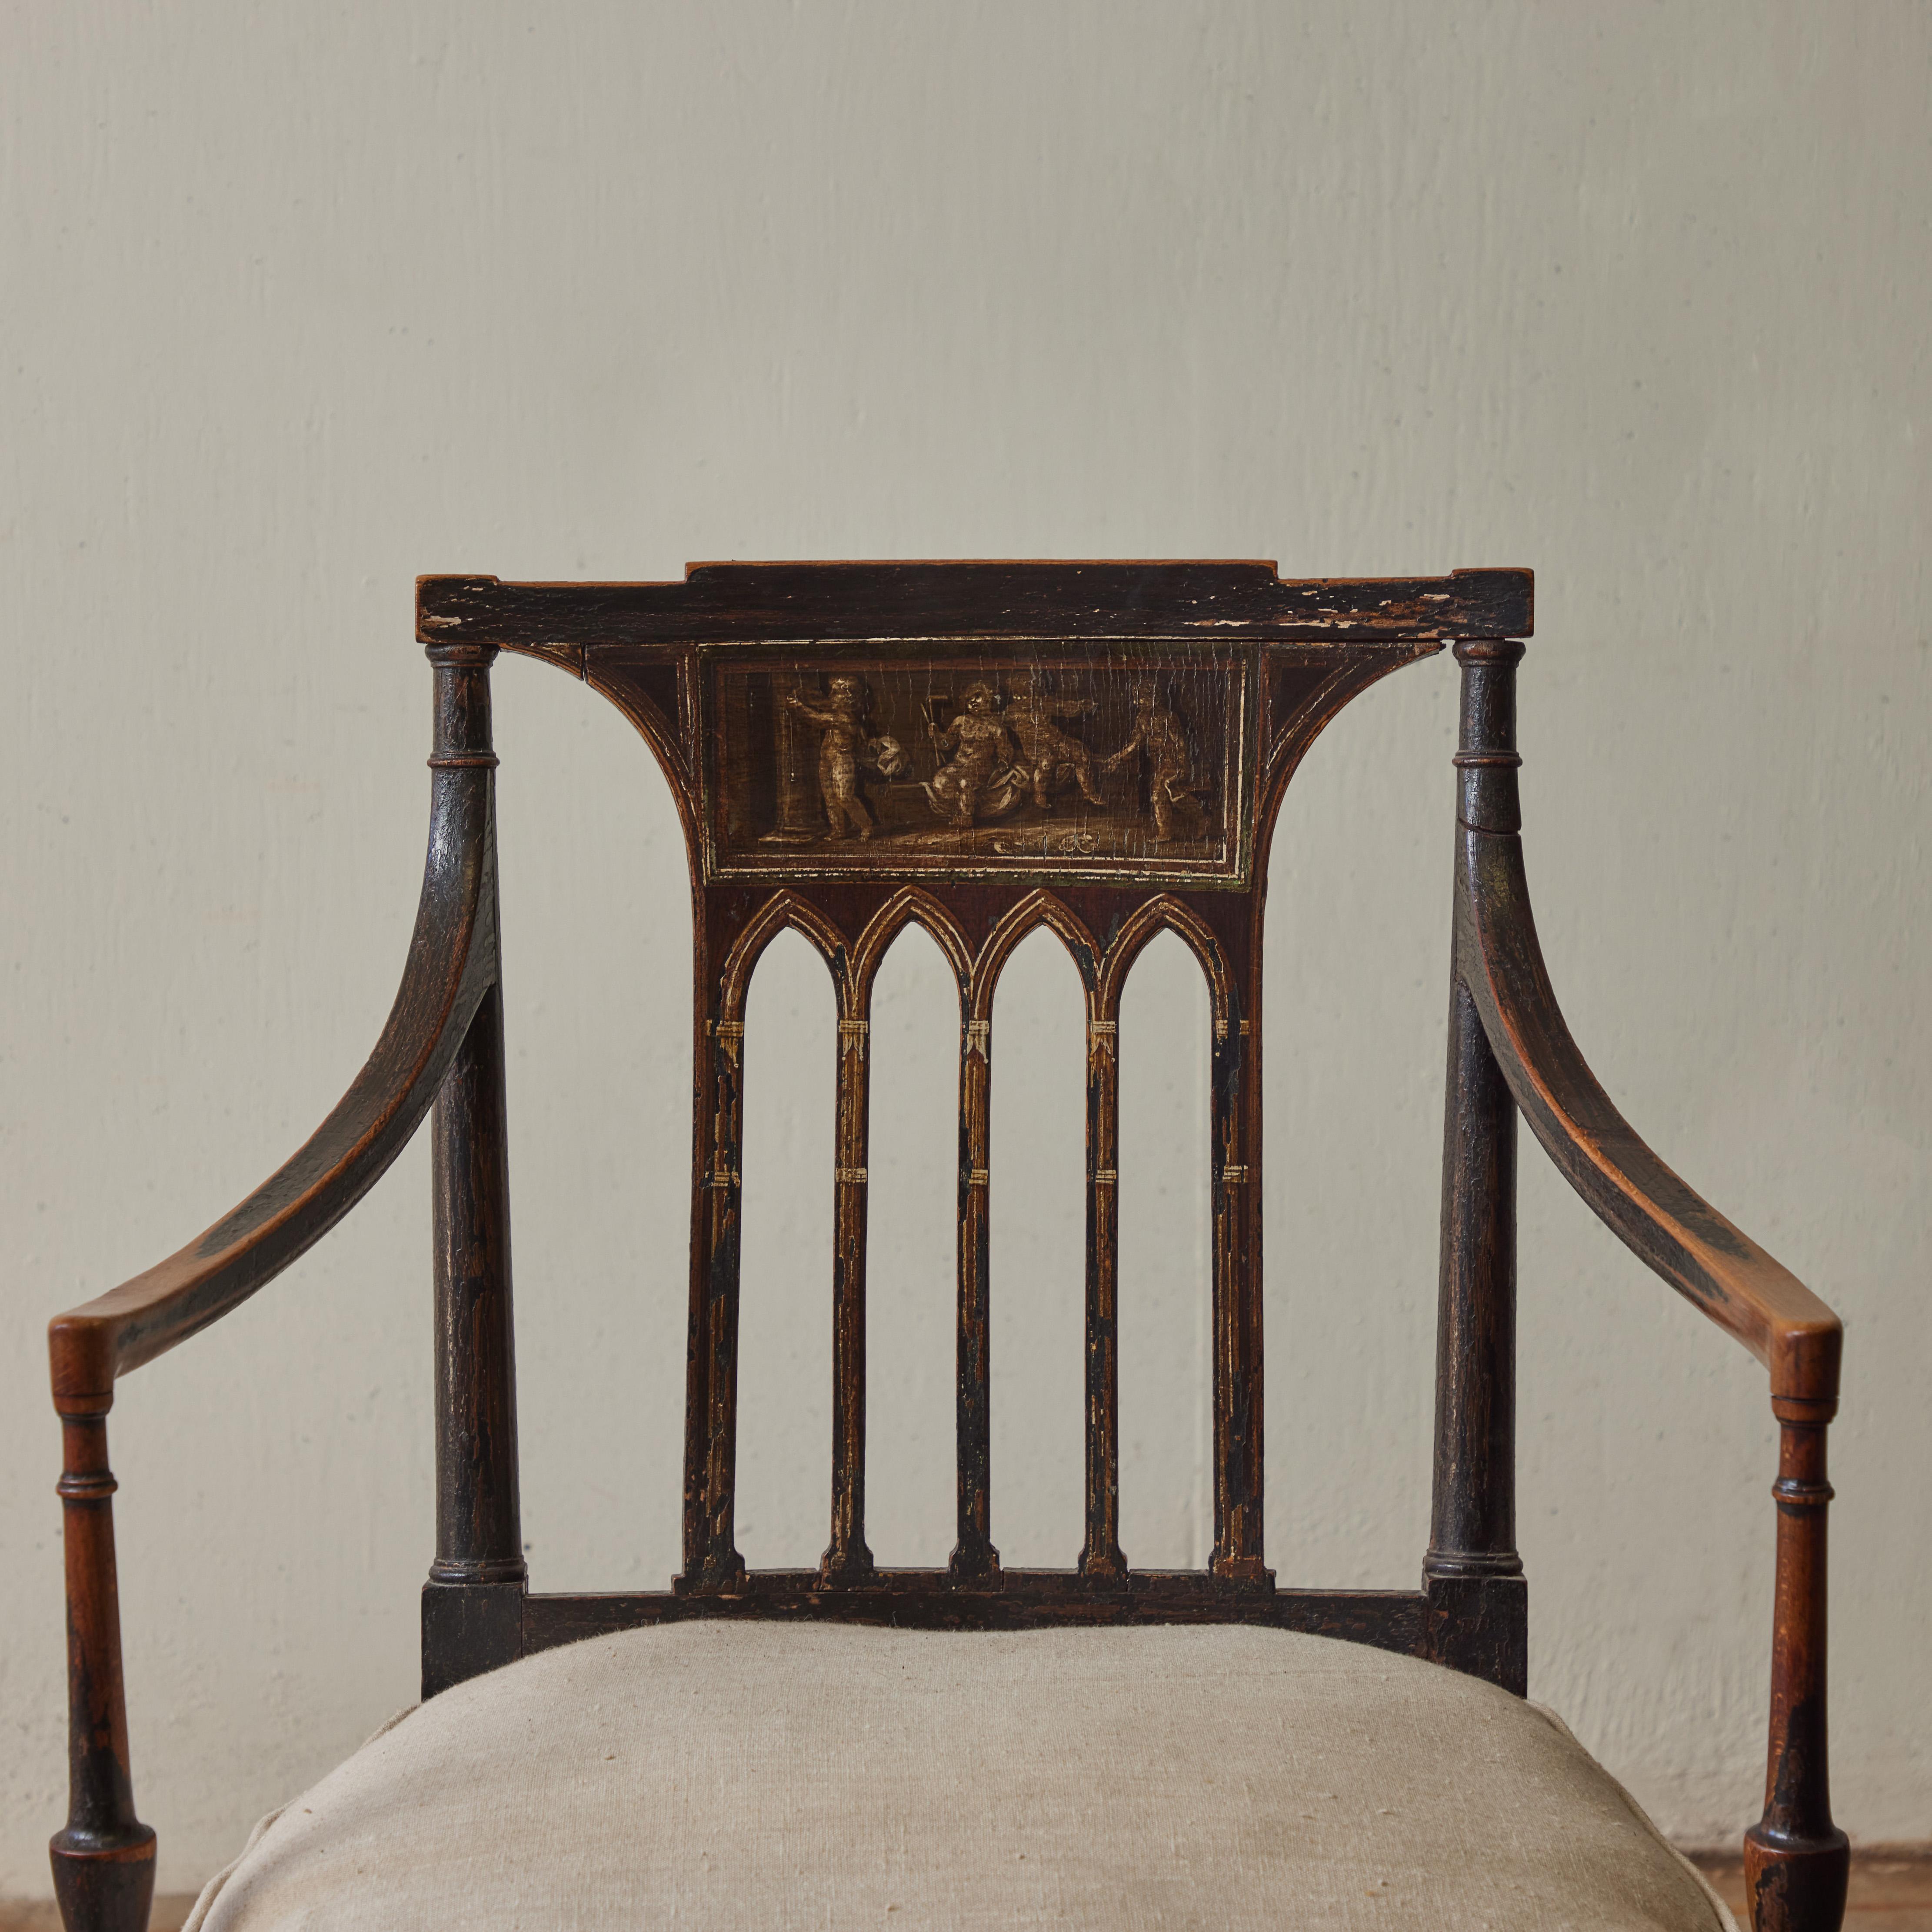 Early 19th century English espresso black caned seat armchair in the Regency style. Featuring a gilt neoclassical motif of dancing cherubic figures and a contemporary Belgian linen cushion, this handsome yet delicate accent chair adds a uniquely